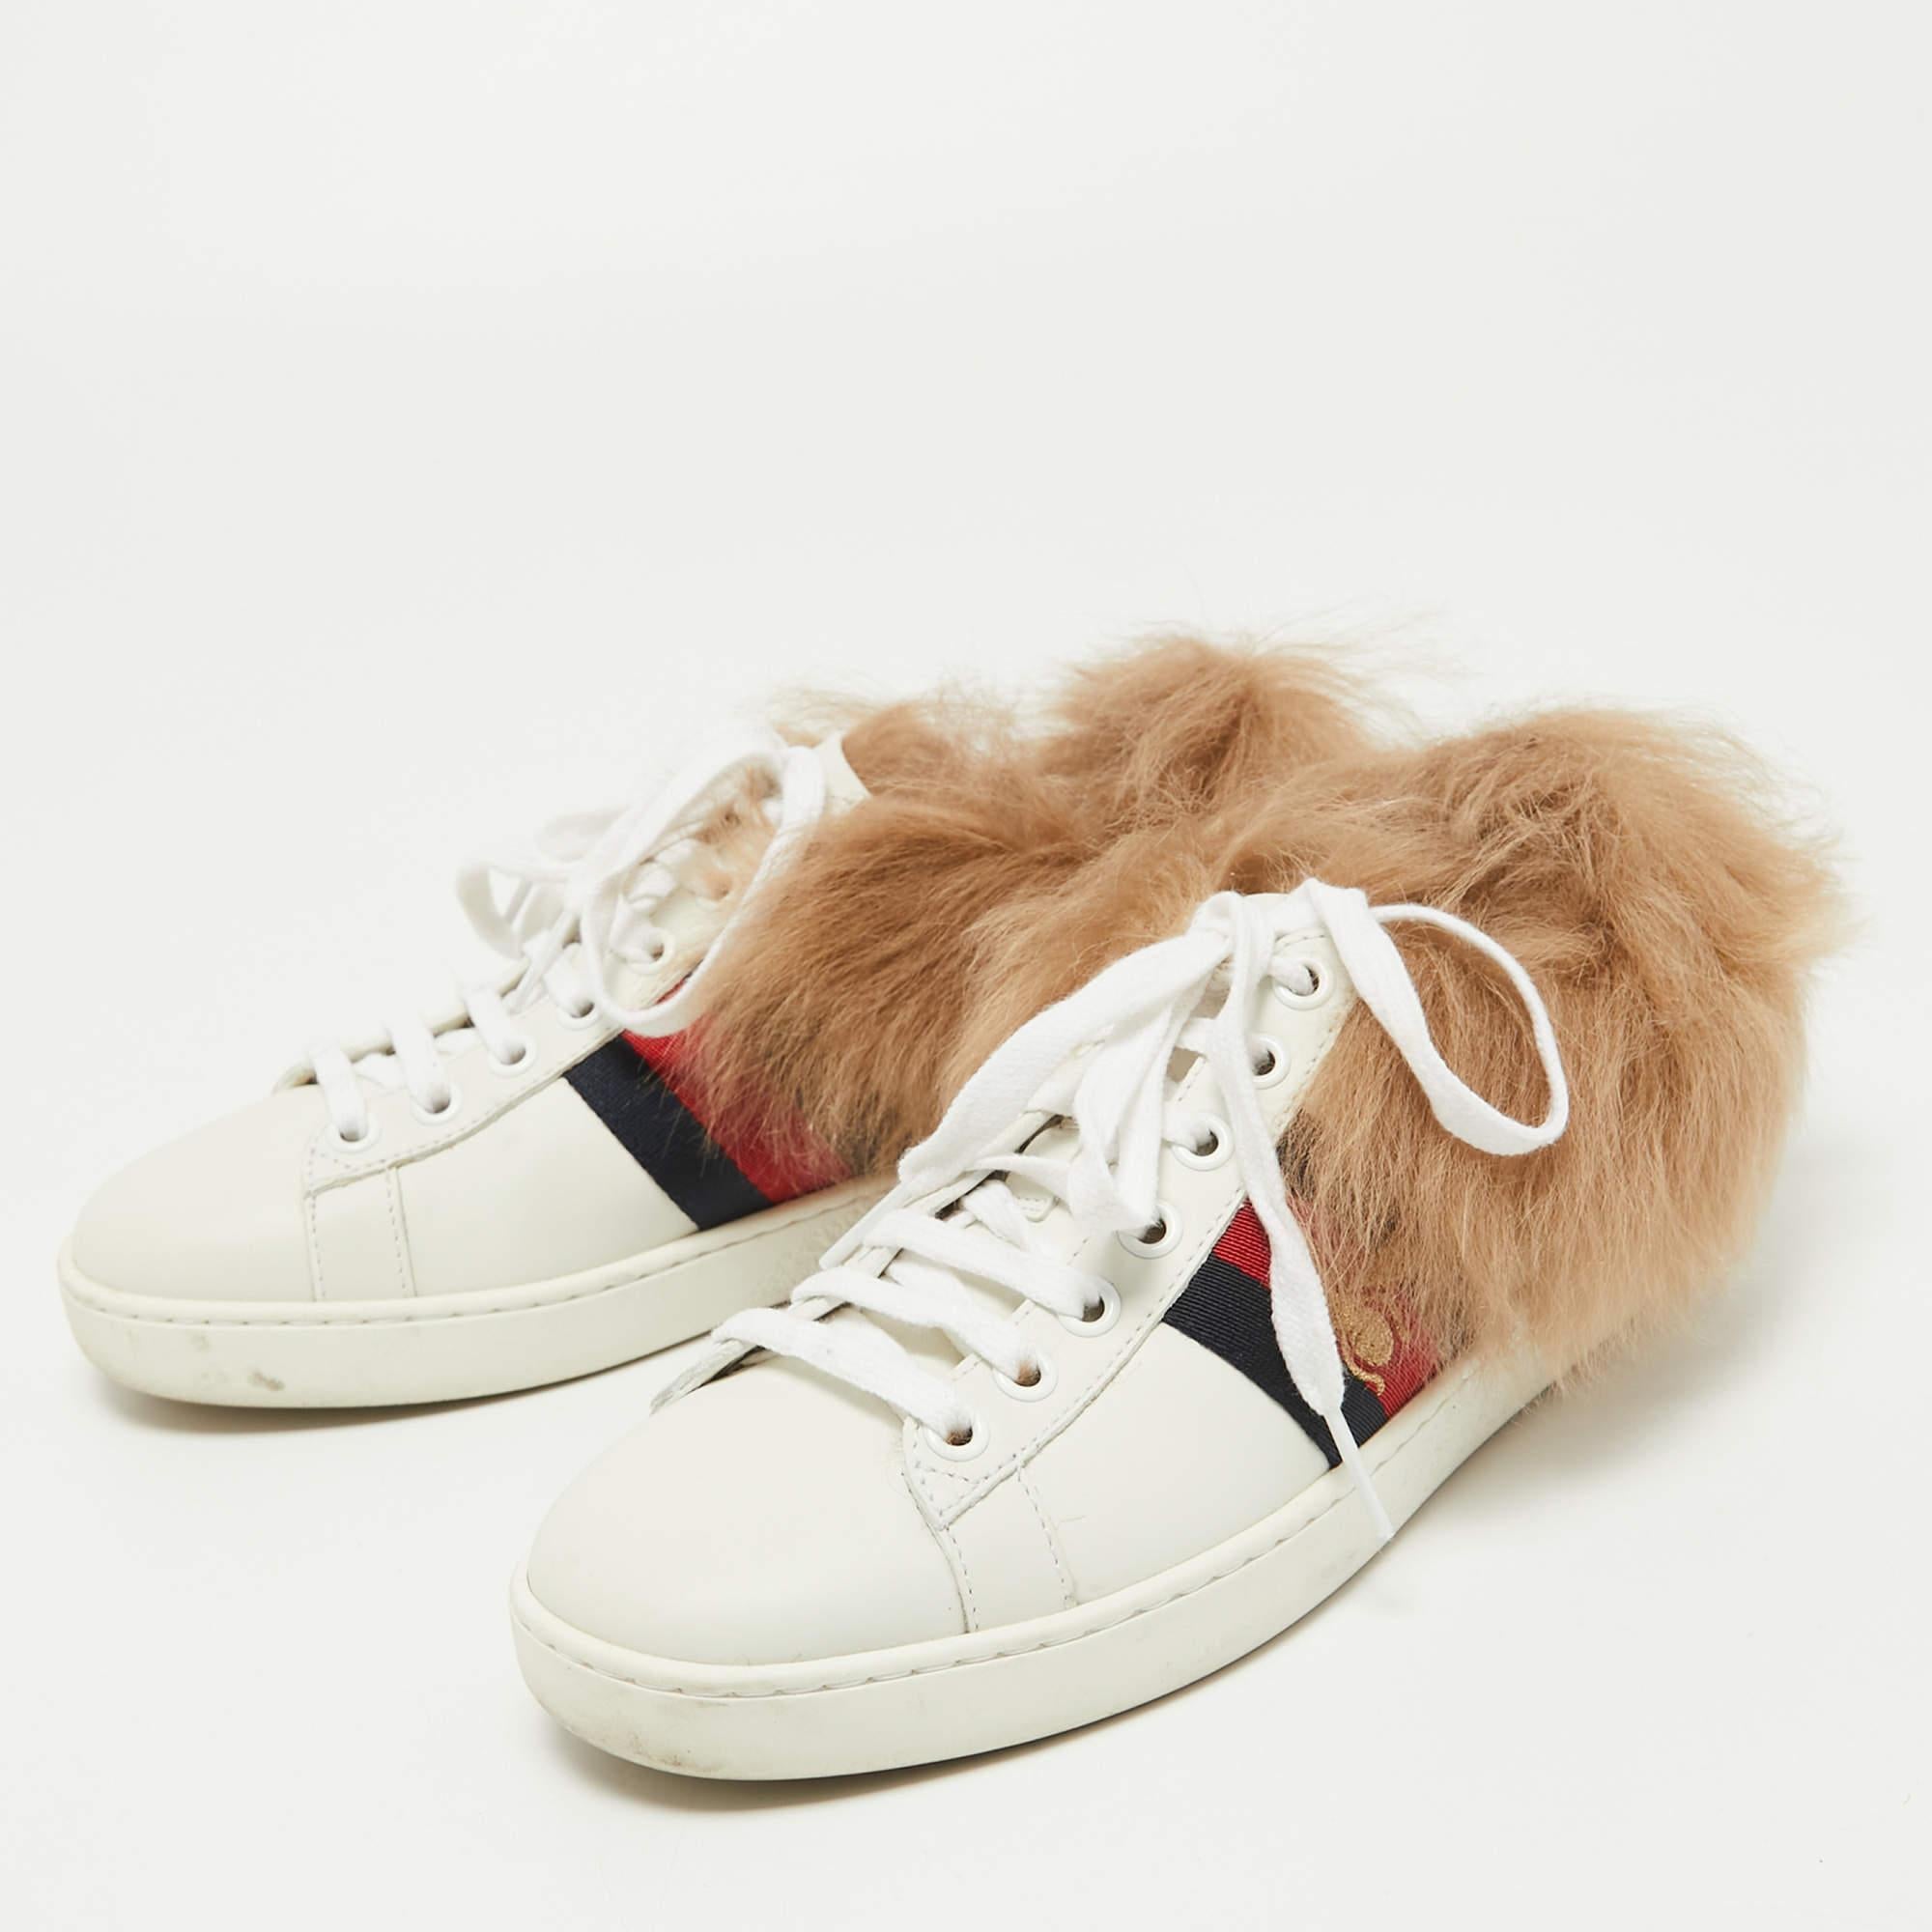 Gucci White Leather and Fur Bee Embroidered Ace Sneakers Size 35 1